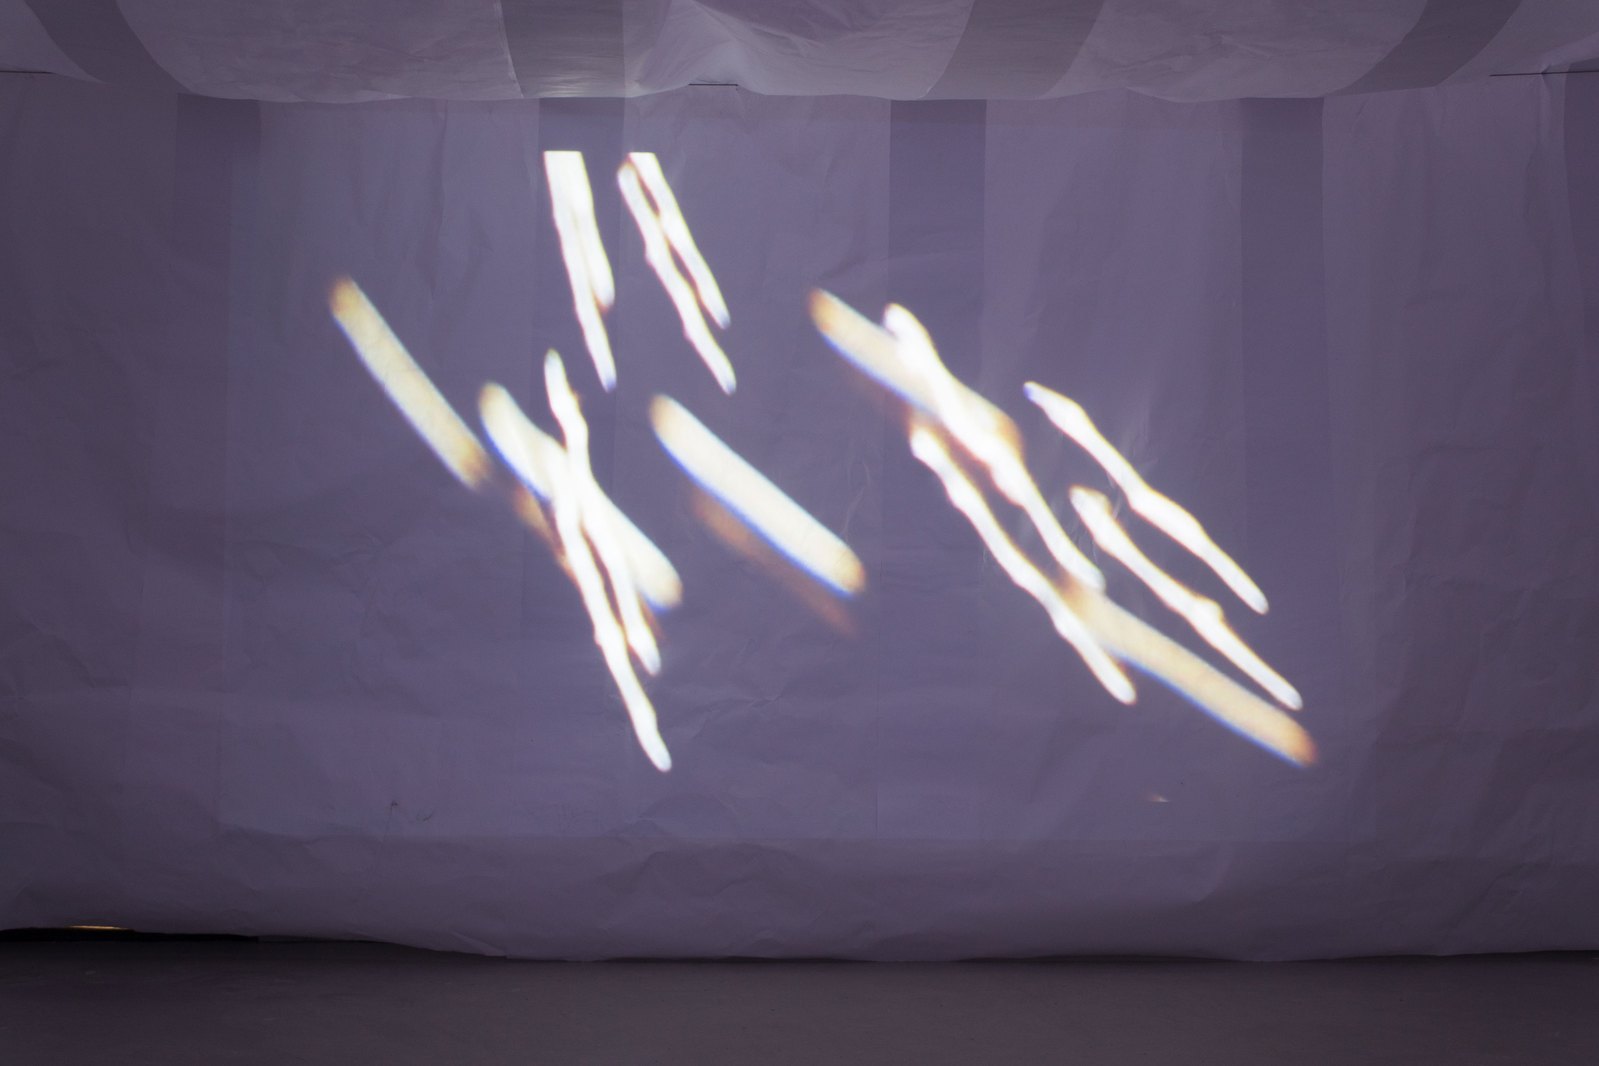 Projection onto paper showing sparks of light. Jamie Kane